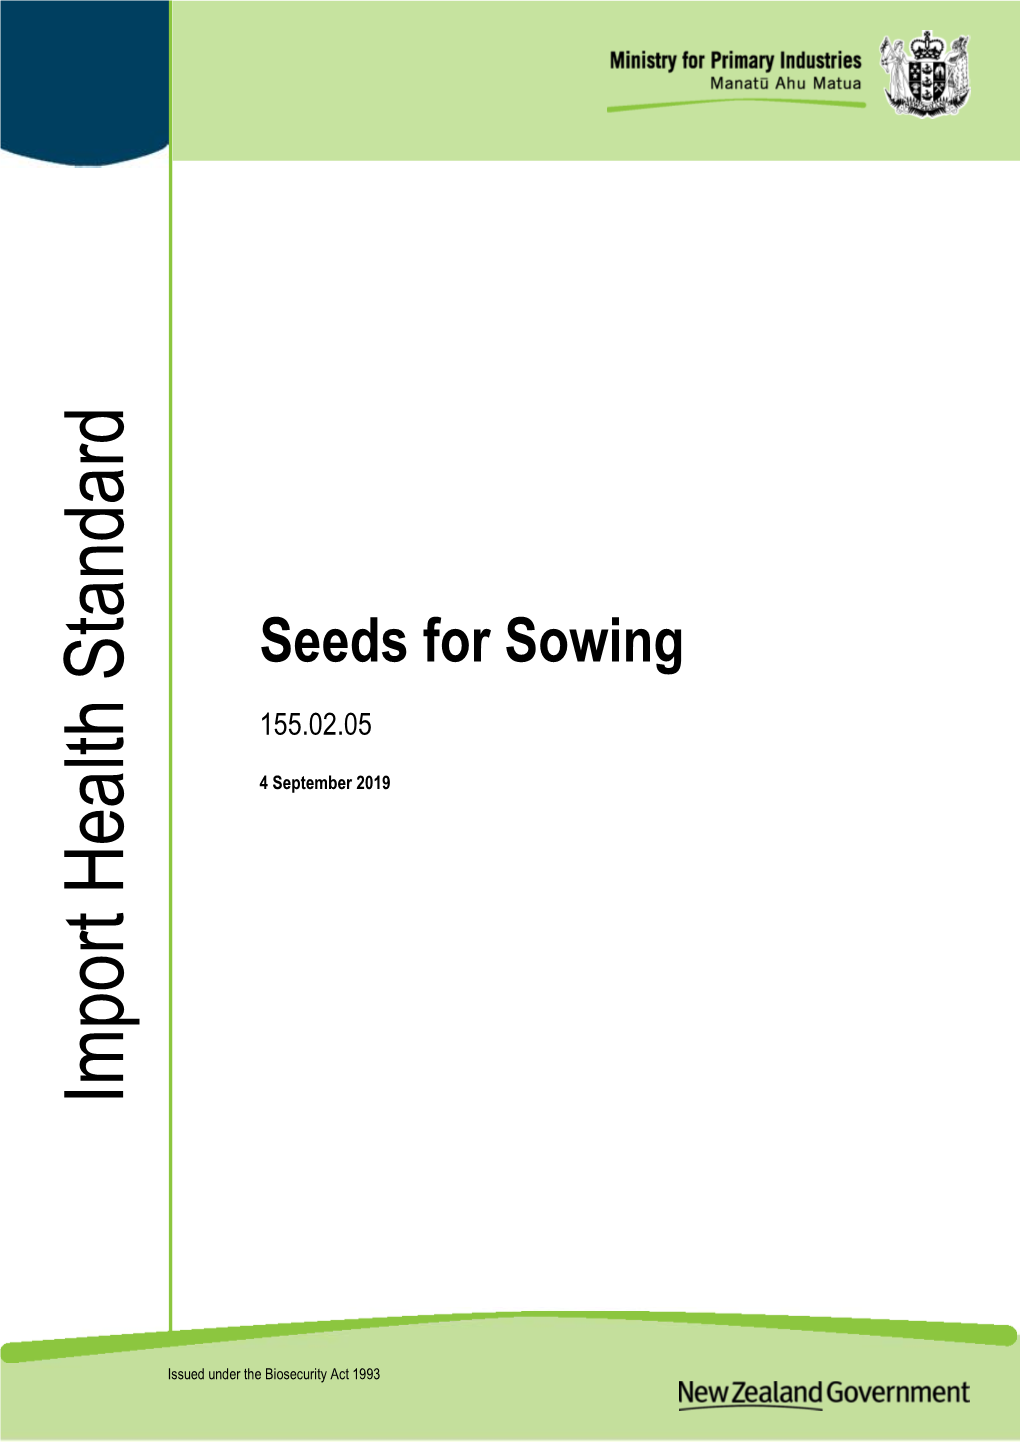 Seeds for Sowing Import Health Standard